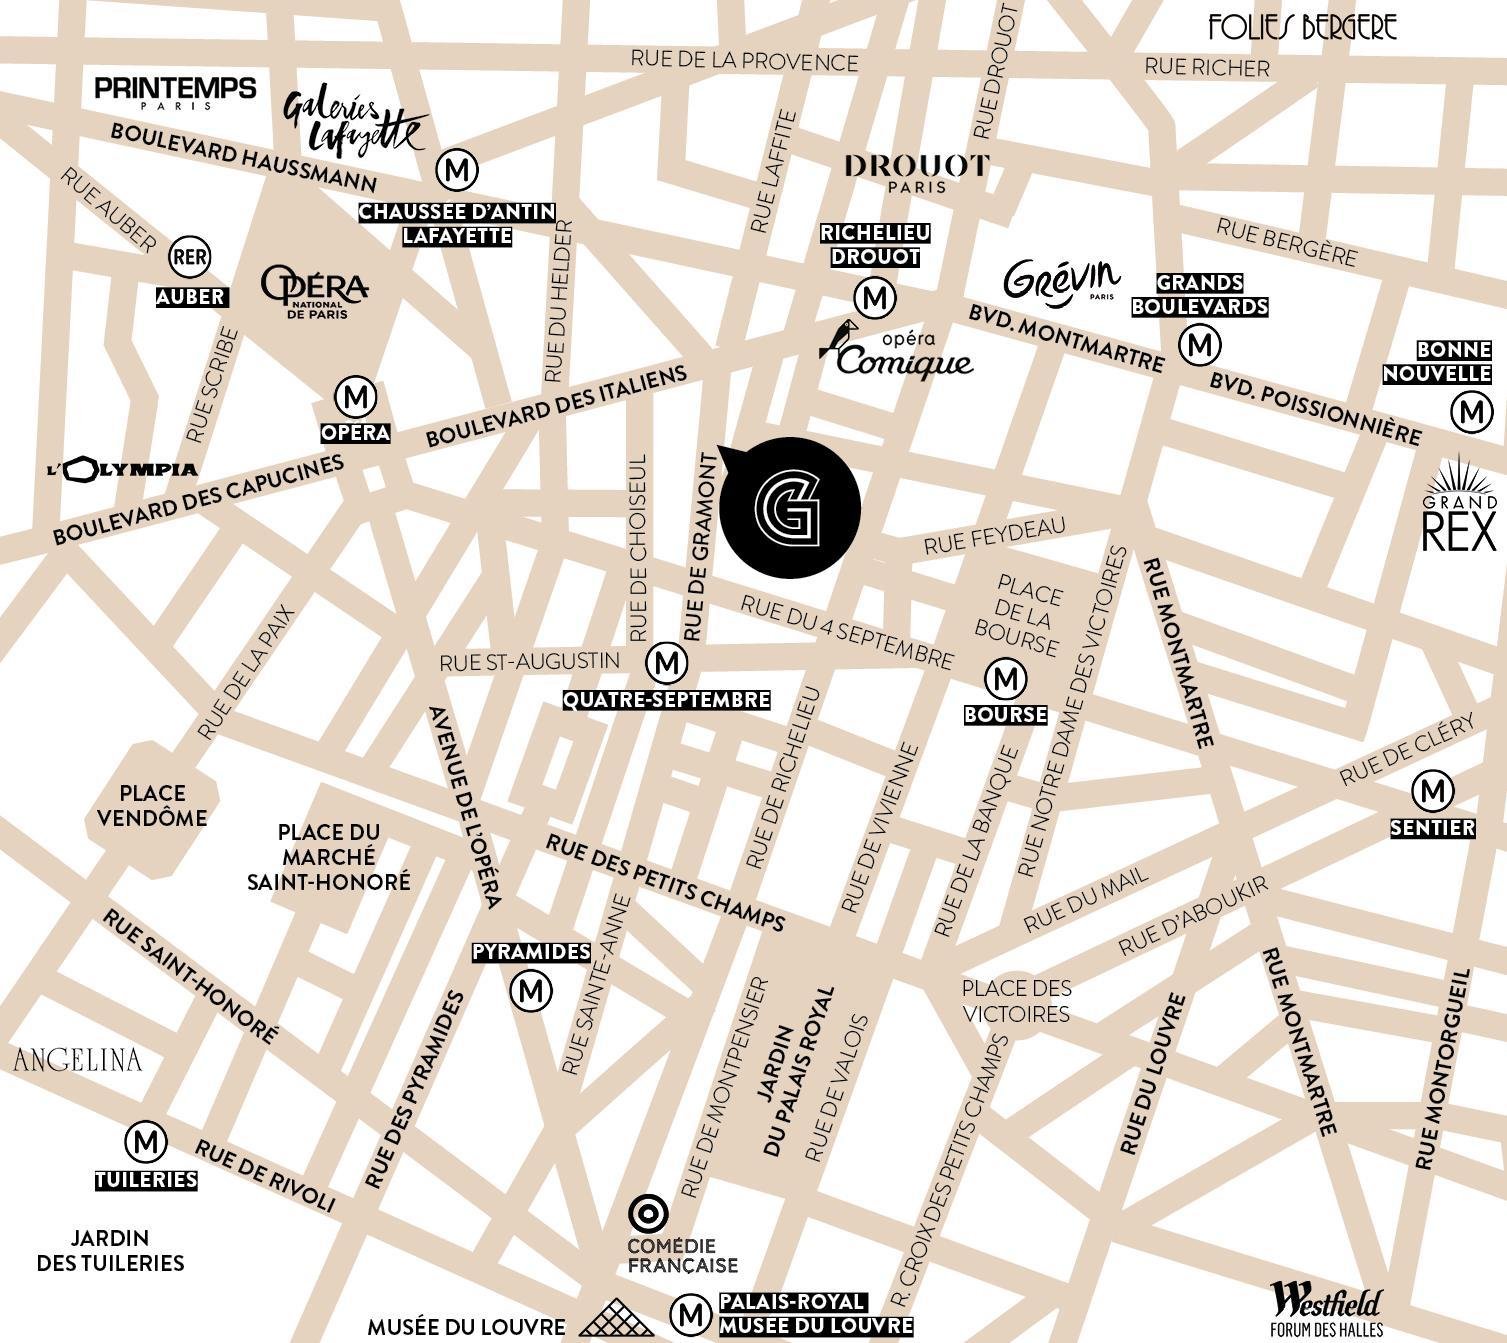 The map of the Hotel Gramont neighborhood, located close to the Opera. Transports and car park around.